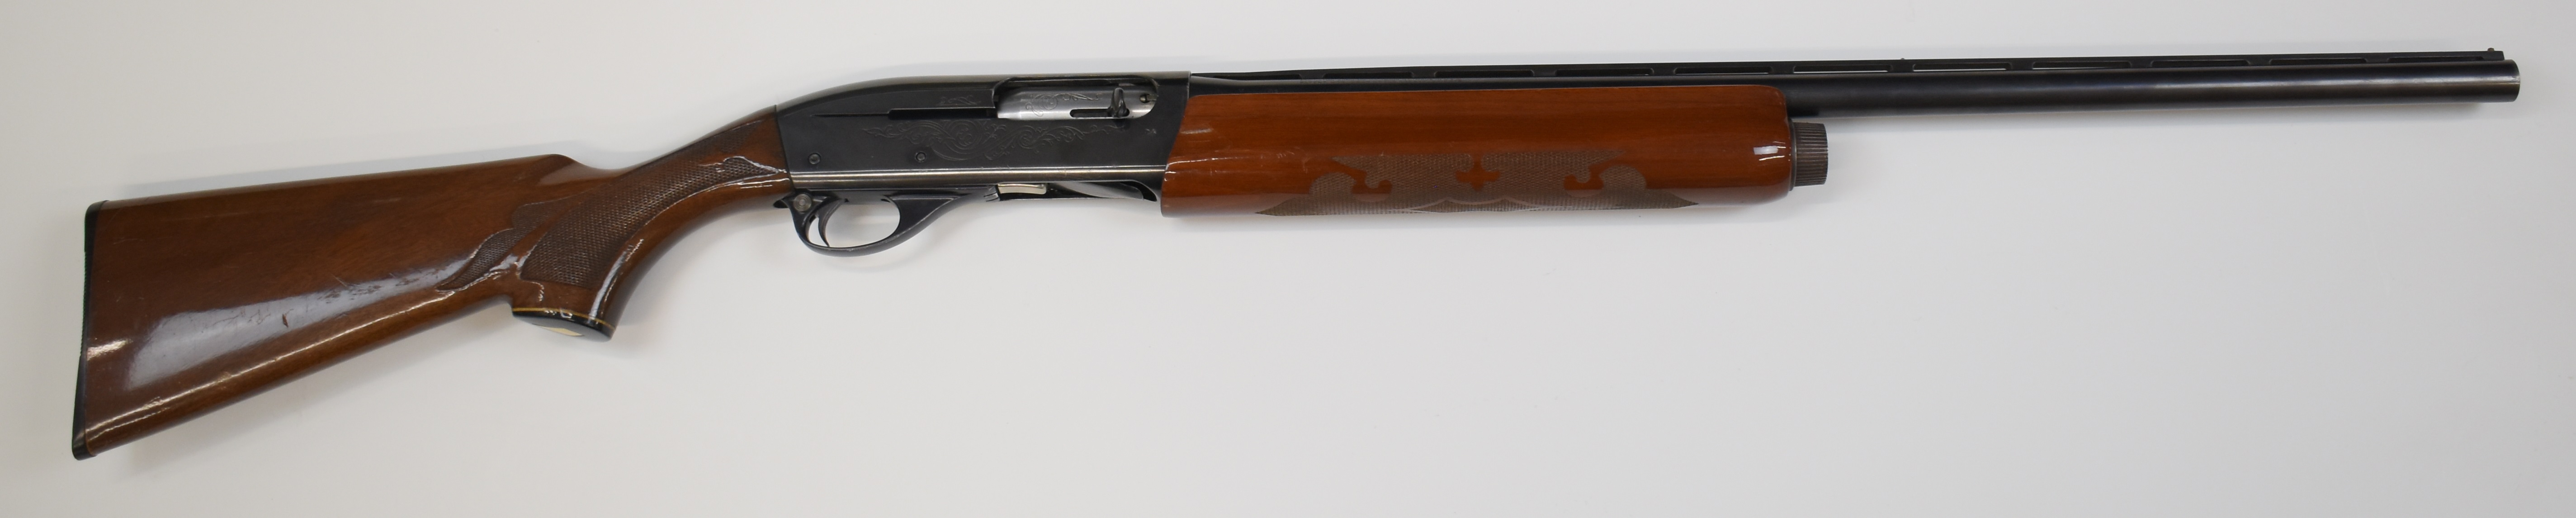 Remington Model 1100 12 bore 3-shot semi-automatic shotgun with ornately carved and chequered semi- - Image 2 of 10